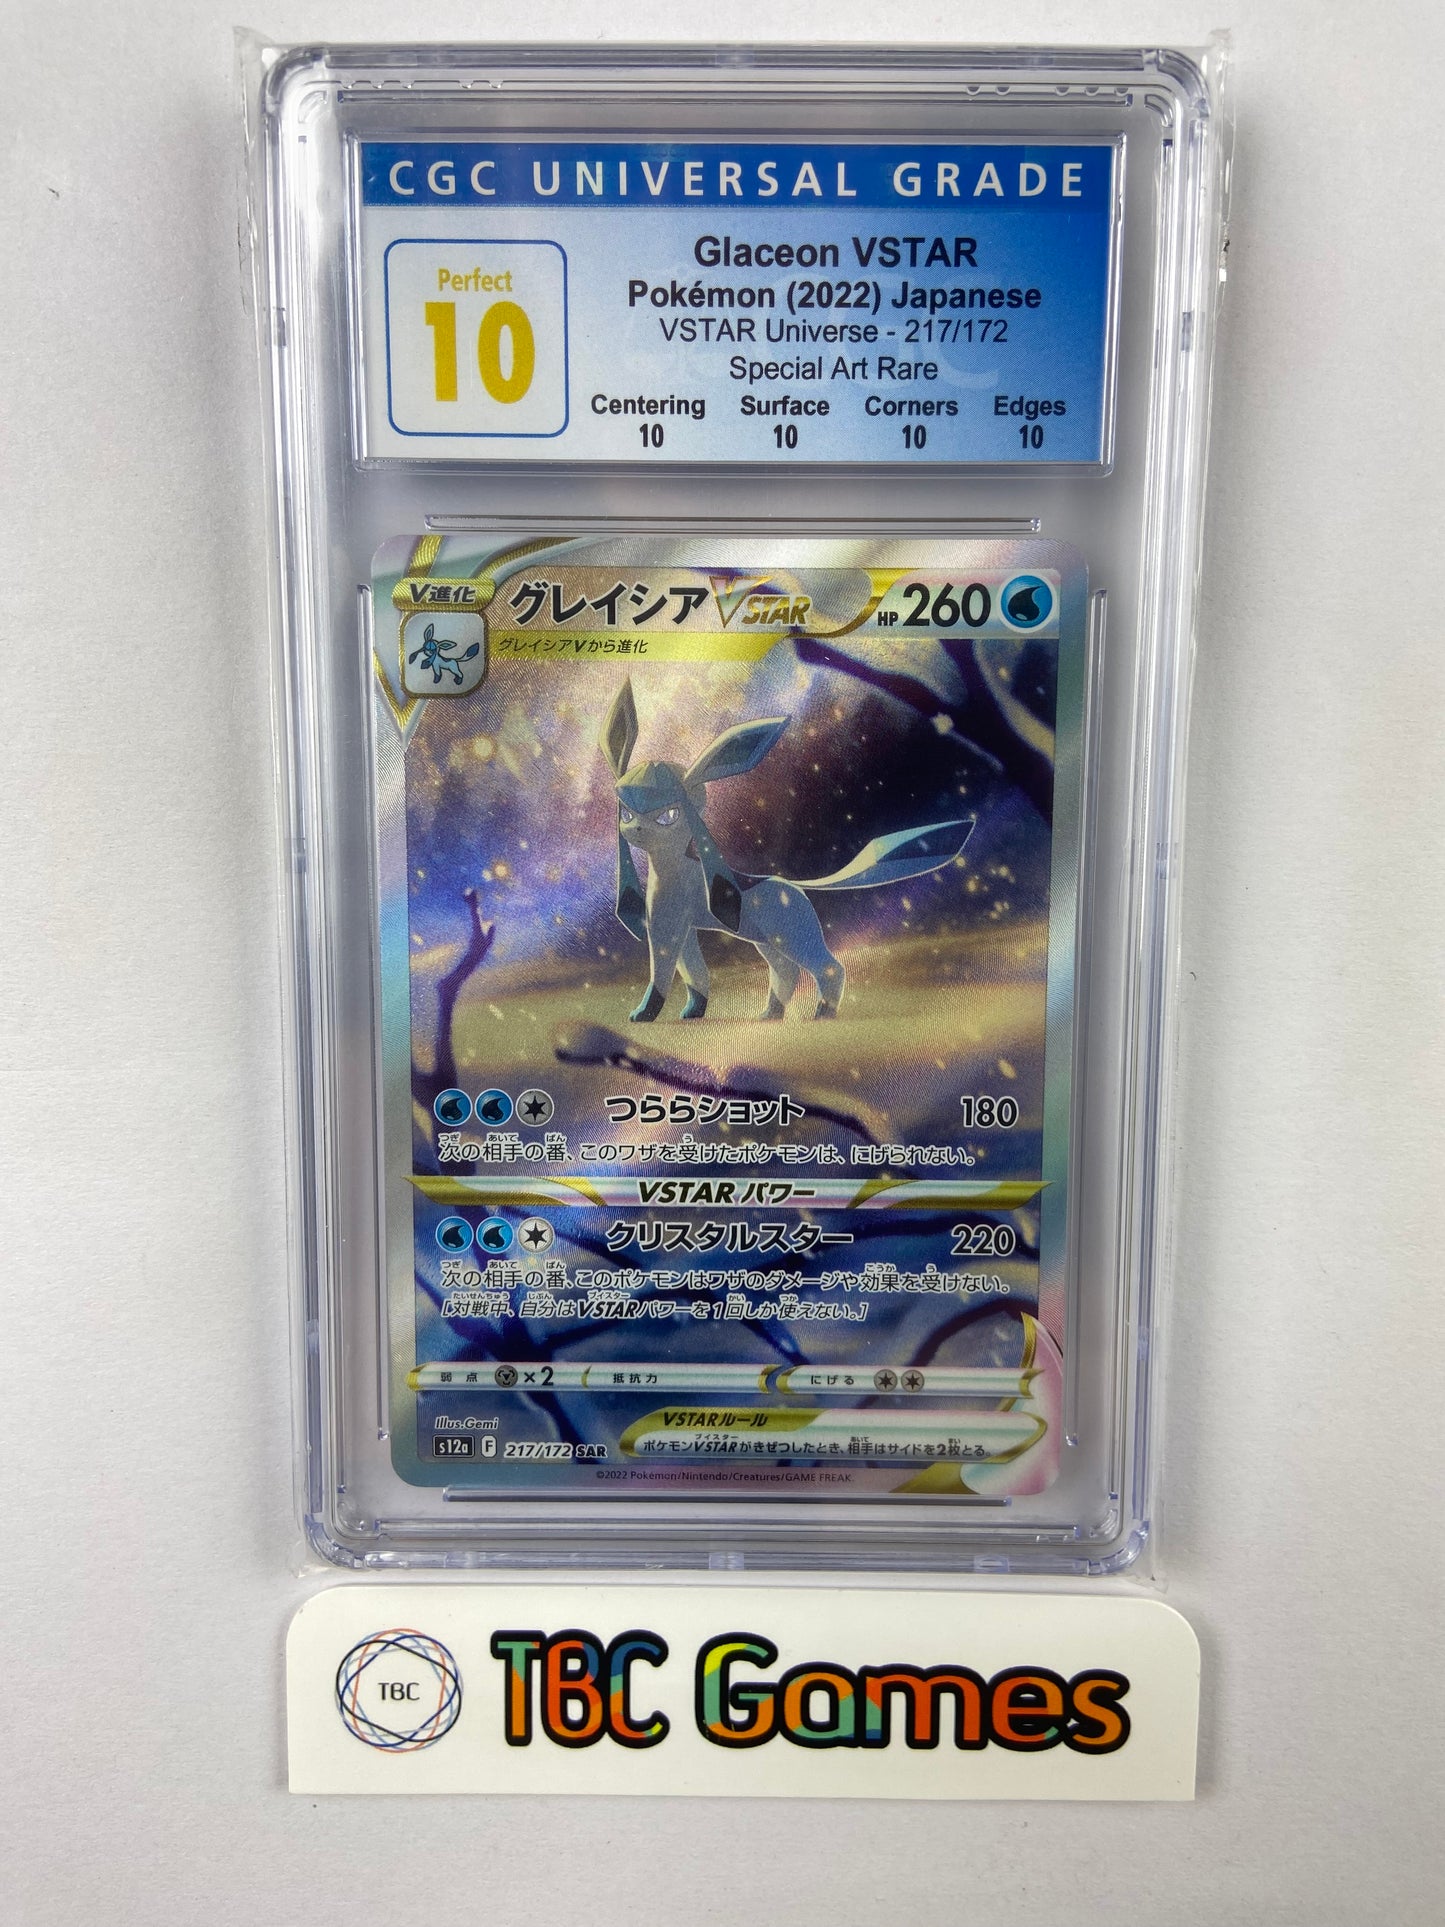 Glaceon VSTAR Universe 217/172 Japanese Perfect CGC 10